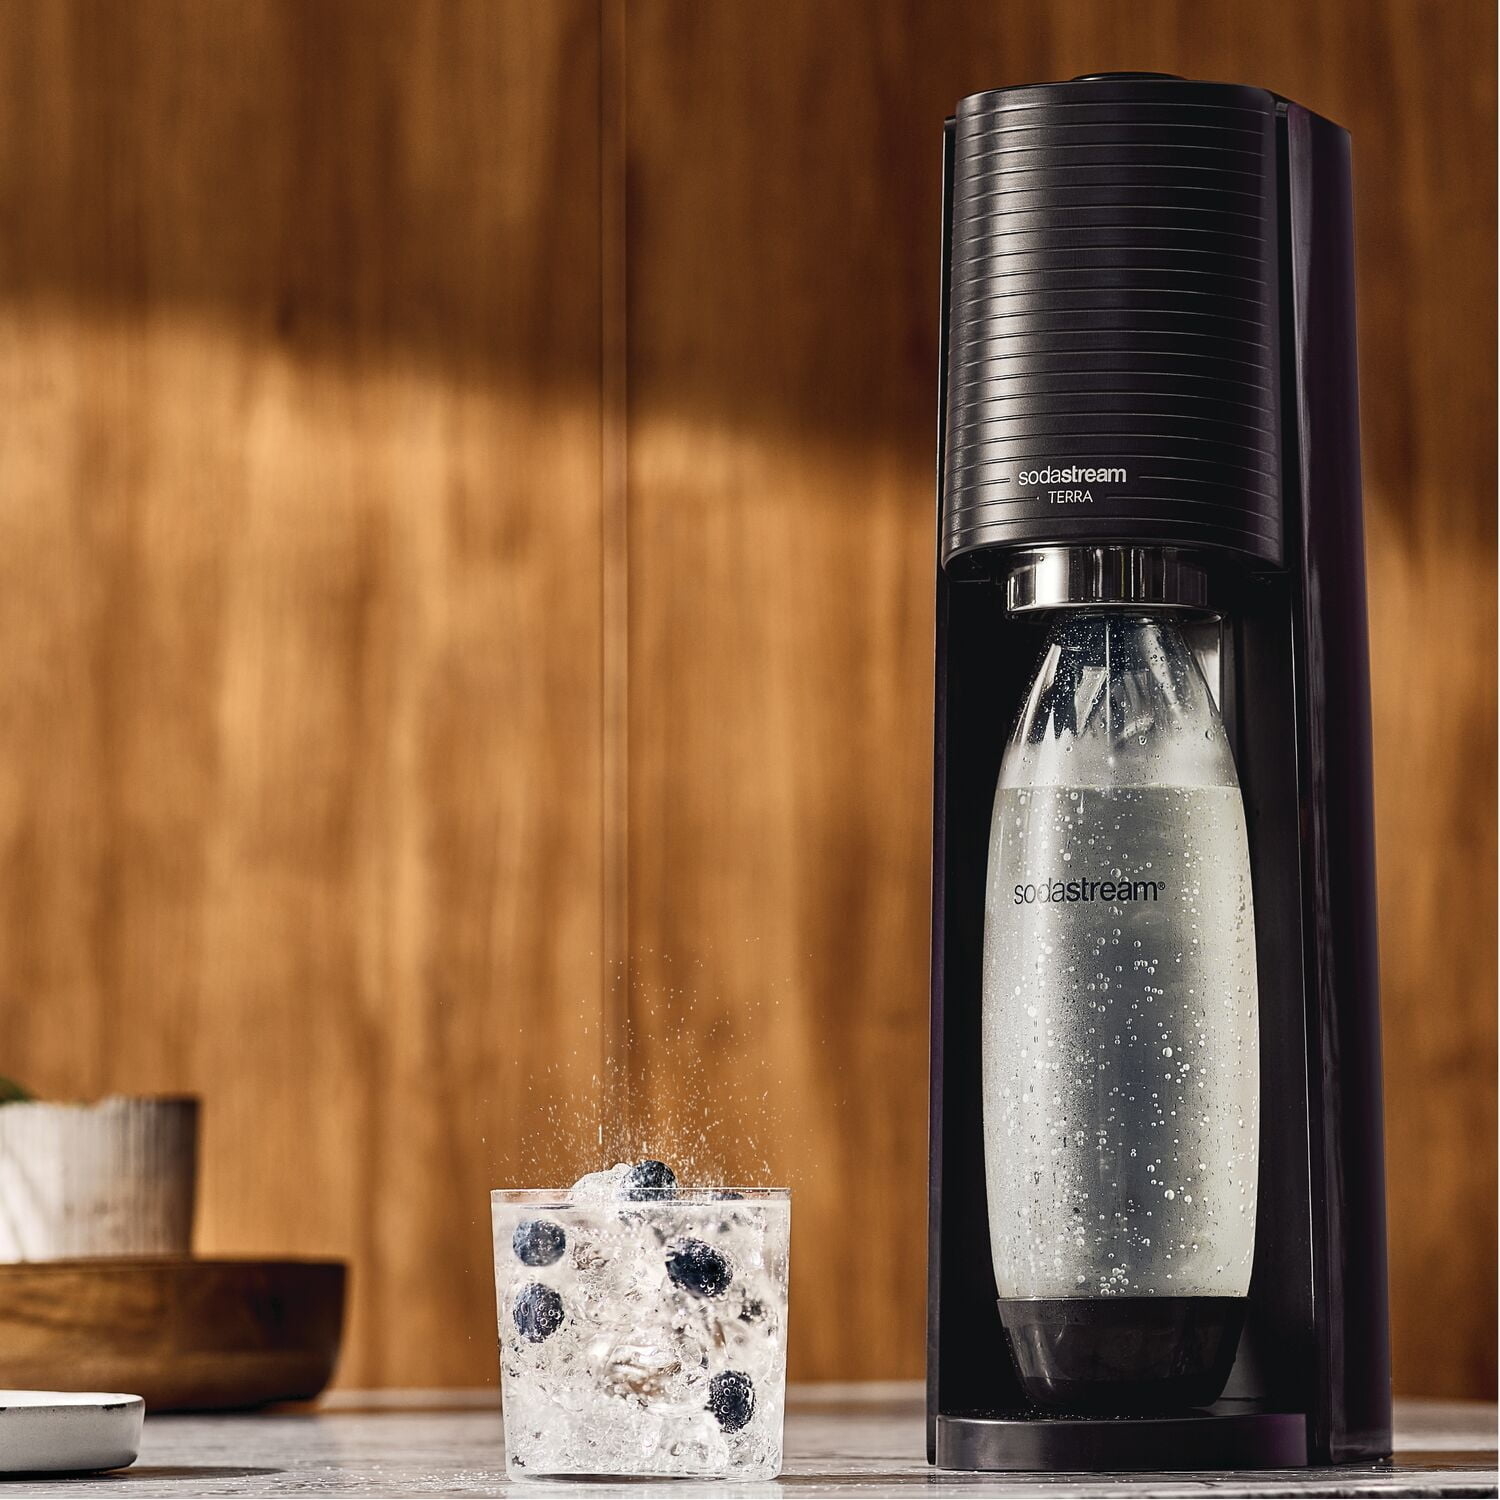 SodaStream machine carbonating water in a bottle next to a glass with fizzing water and ice cubes, placed on a wooden surface